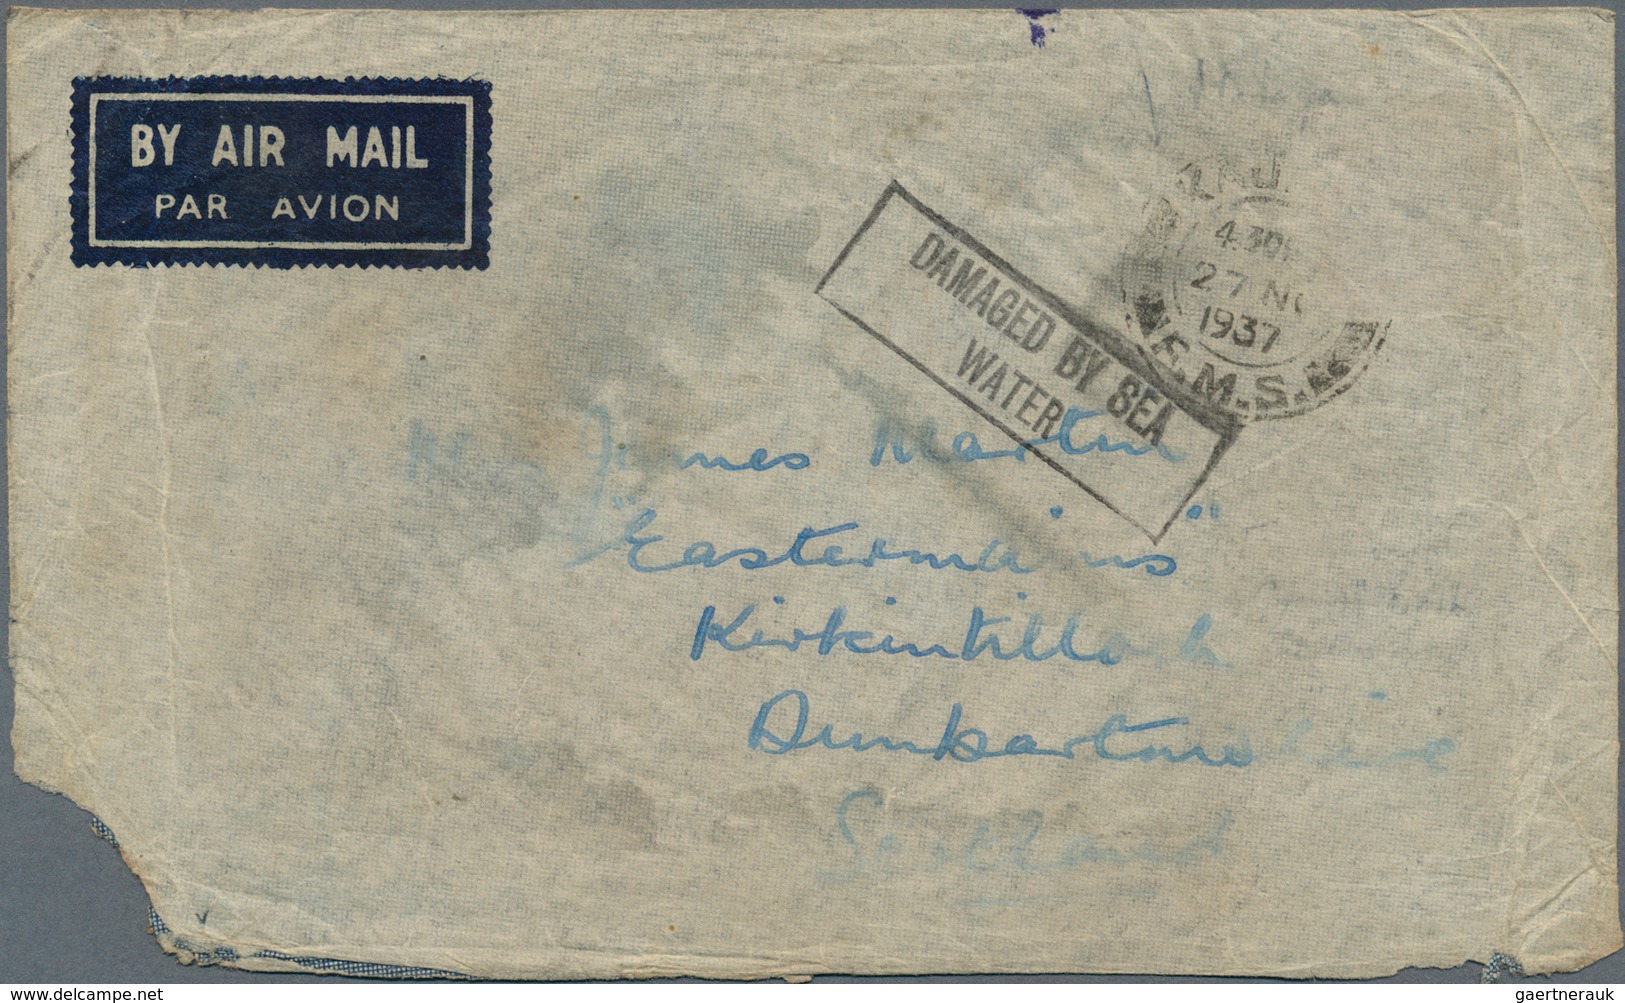 Malaiische Staaten - Selangor: 1937 (27.11.), SALVAGED AIRMAIL Cover From KAJANG/F.M.S. With Stamp M - Selangor